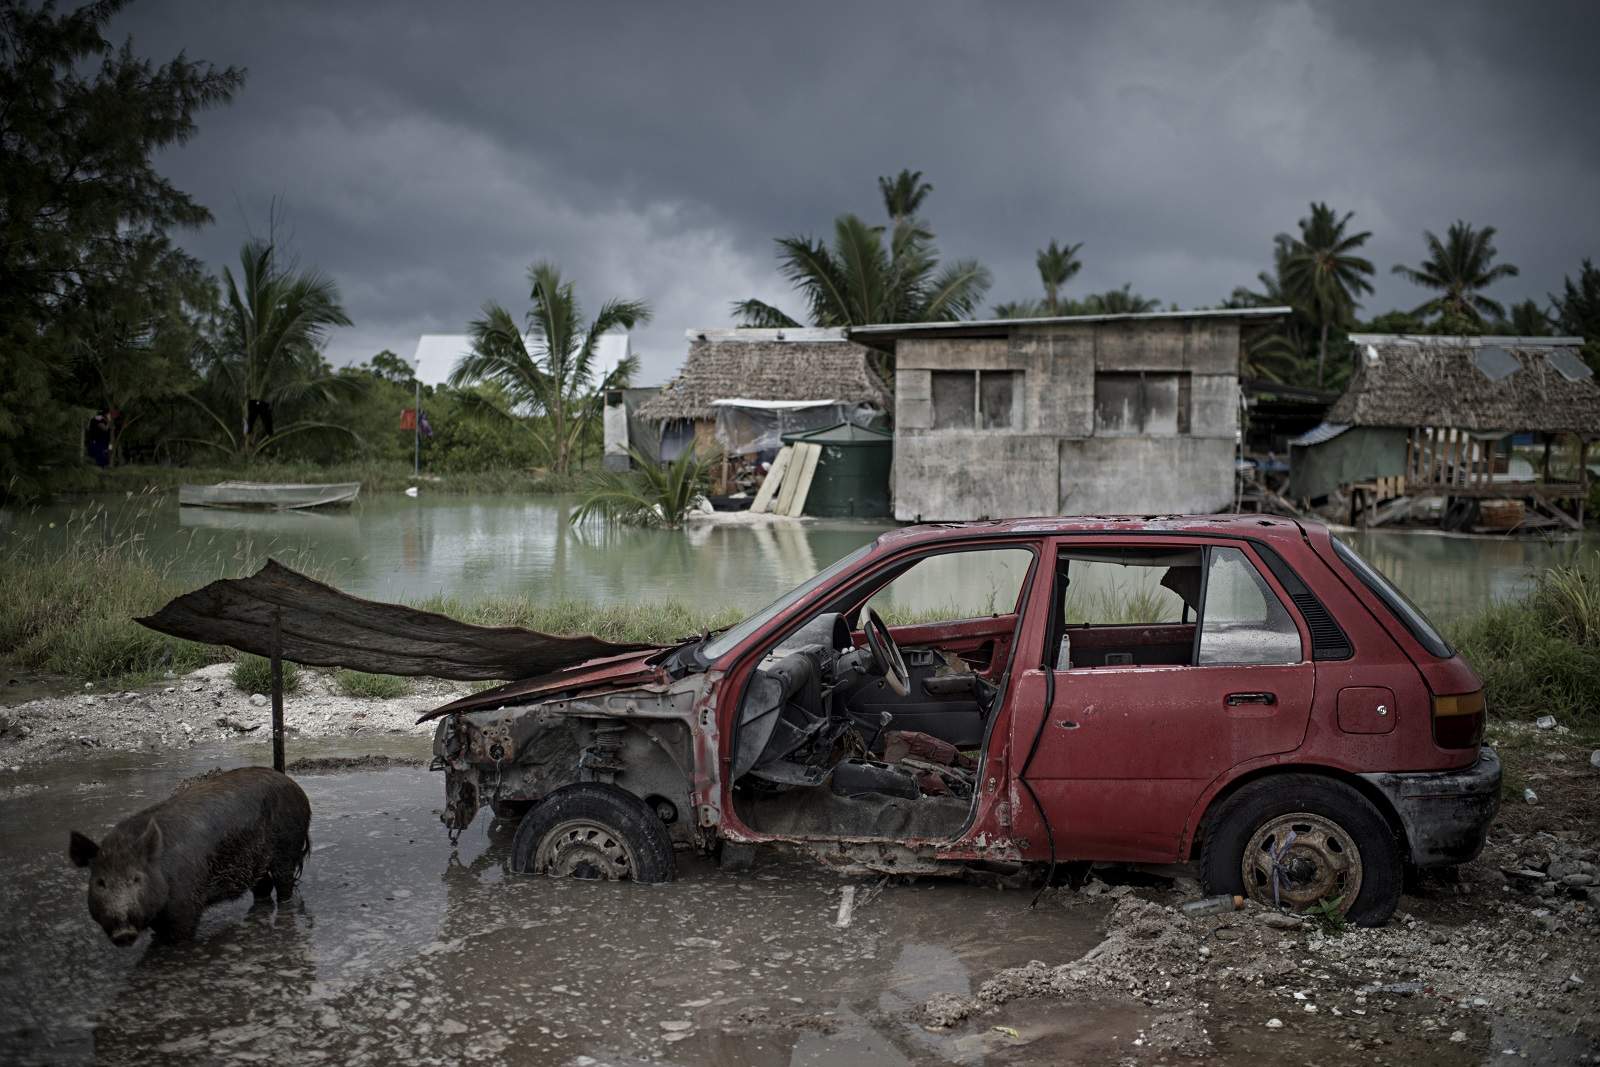 Sea level rise has direct consequences on Pacific island countries. Tarawa, Kiribati after flooding in 2015 (Gratzer/LightRocket via Getty Images)